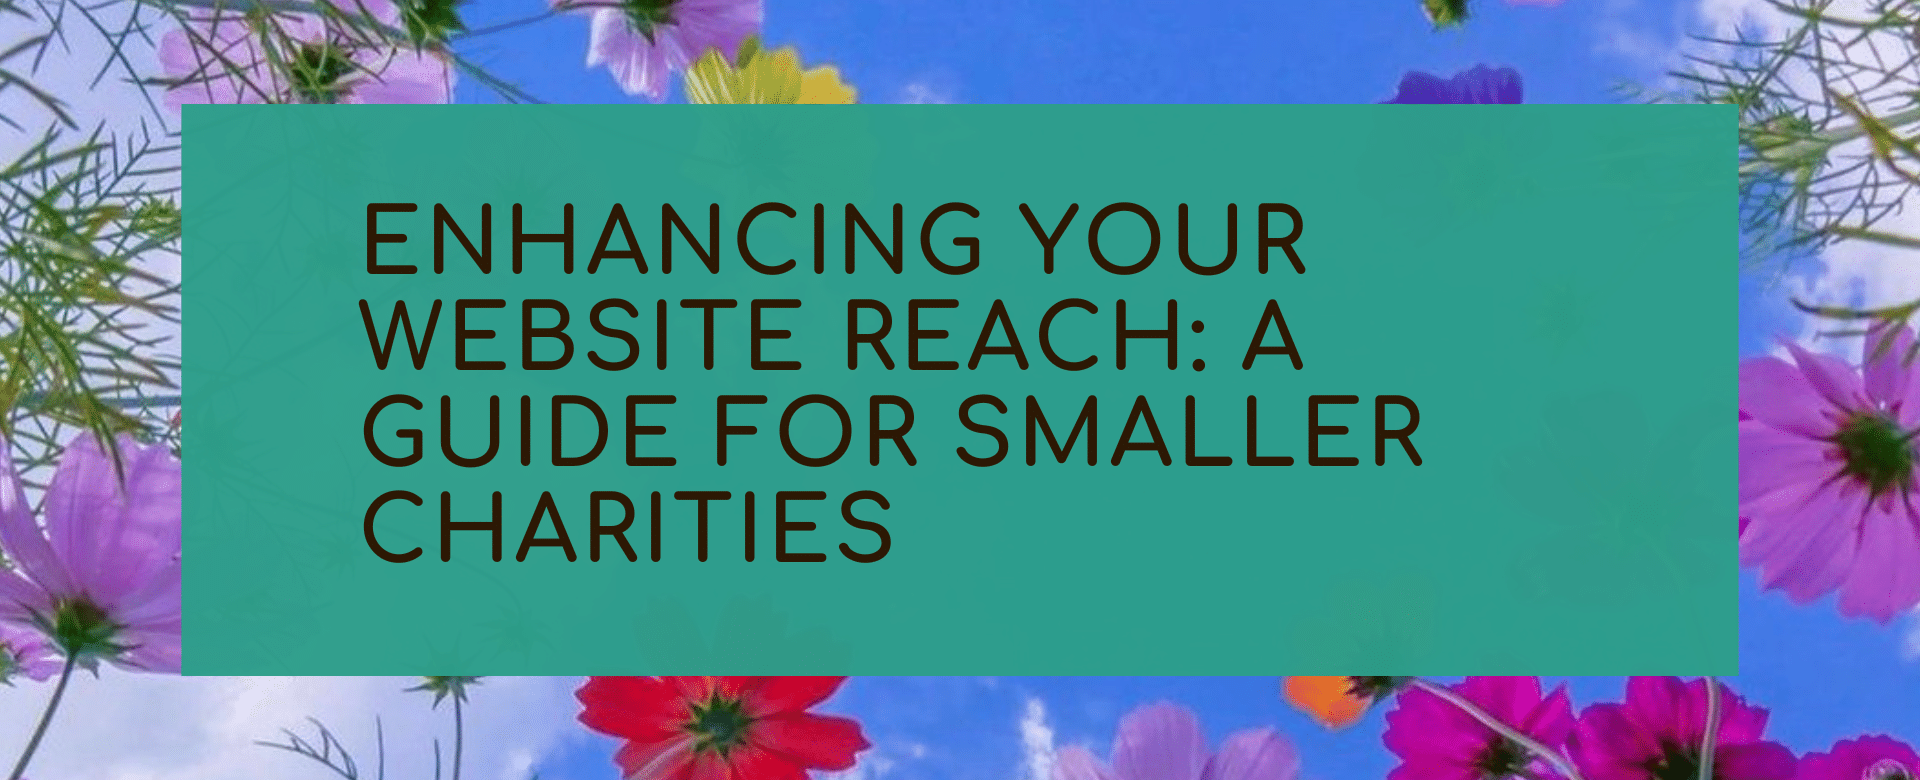 Enhancing Your Website Reach: A Guide for Smaller Charities